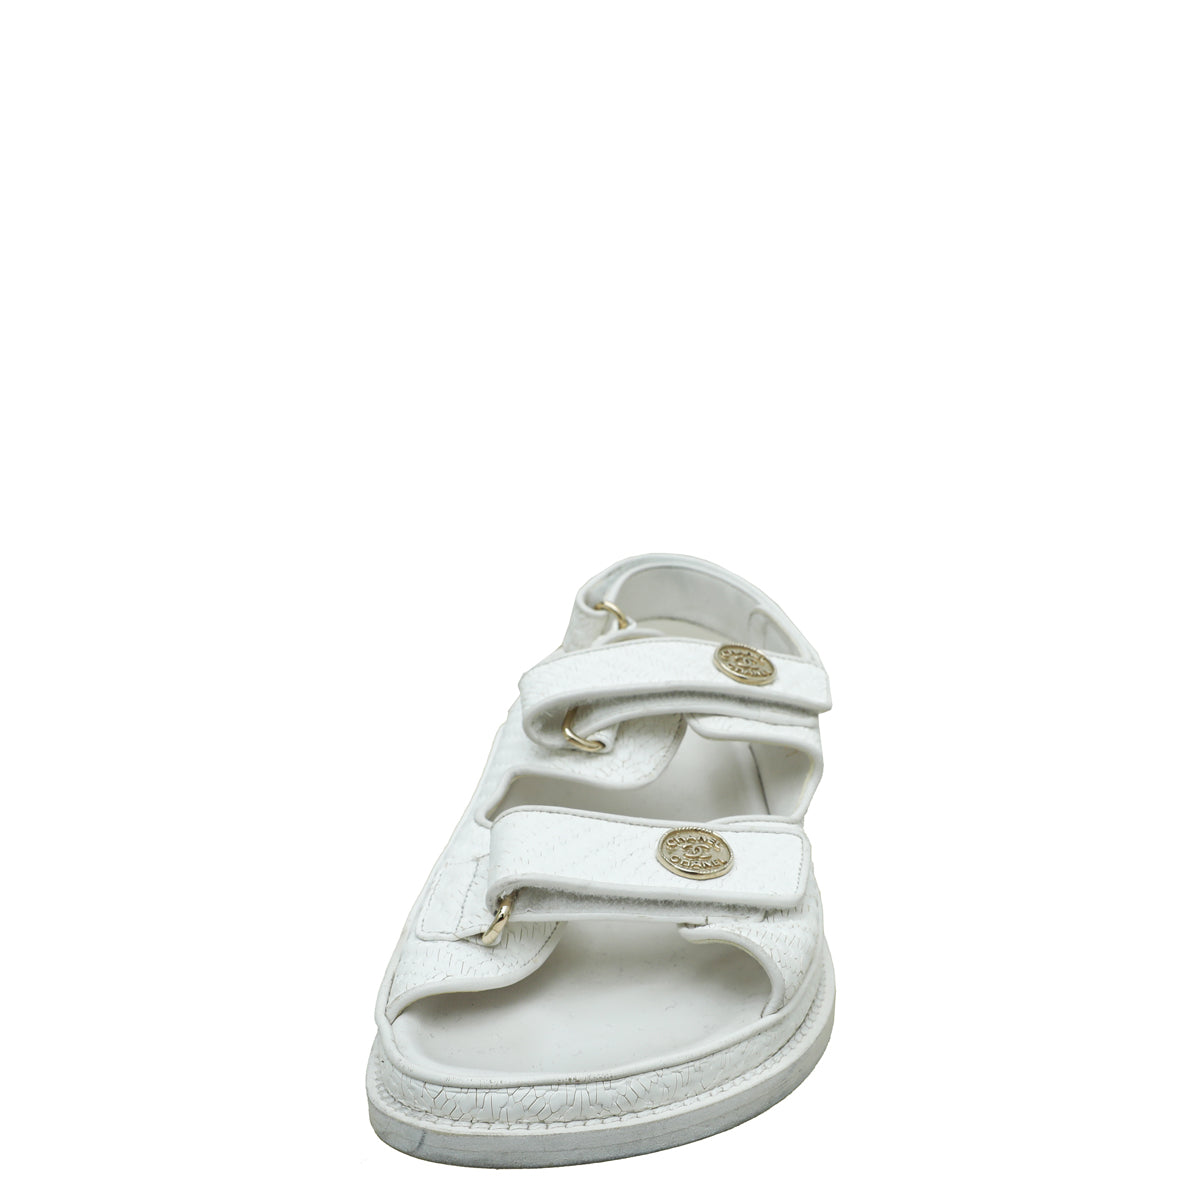 Chanel Quilted Sandal White Laminated Lambskin  G35927 X56883 0S302  US